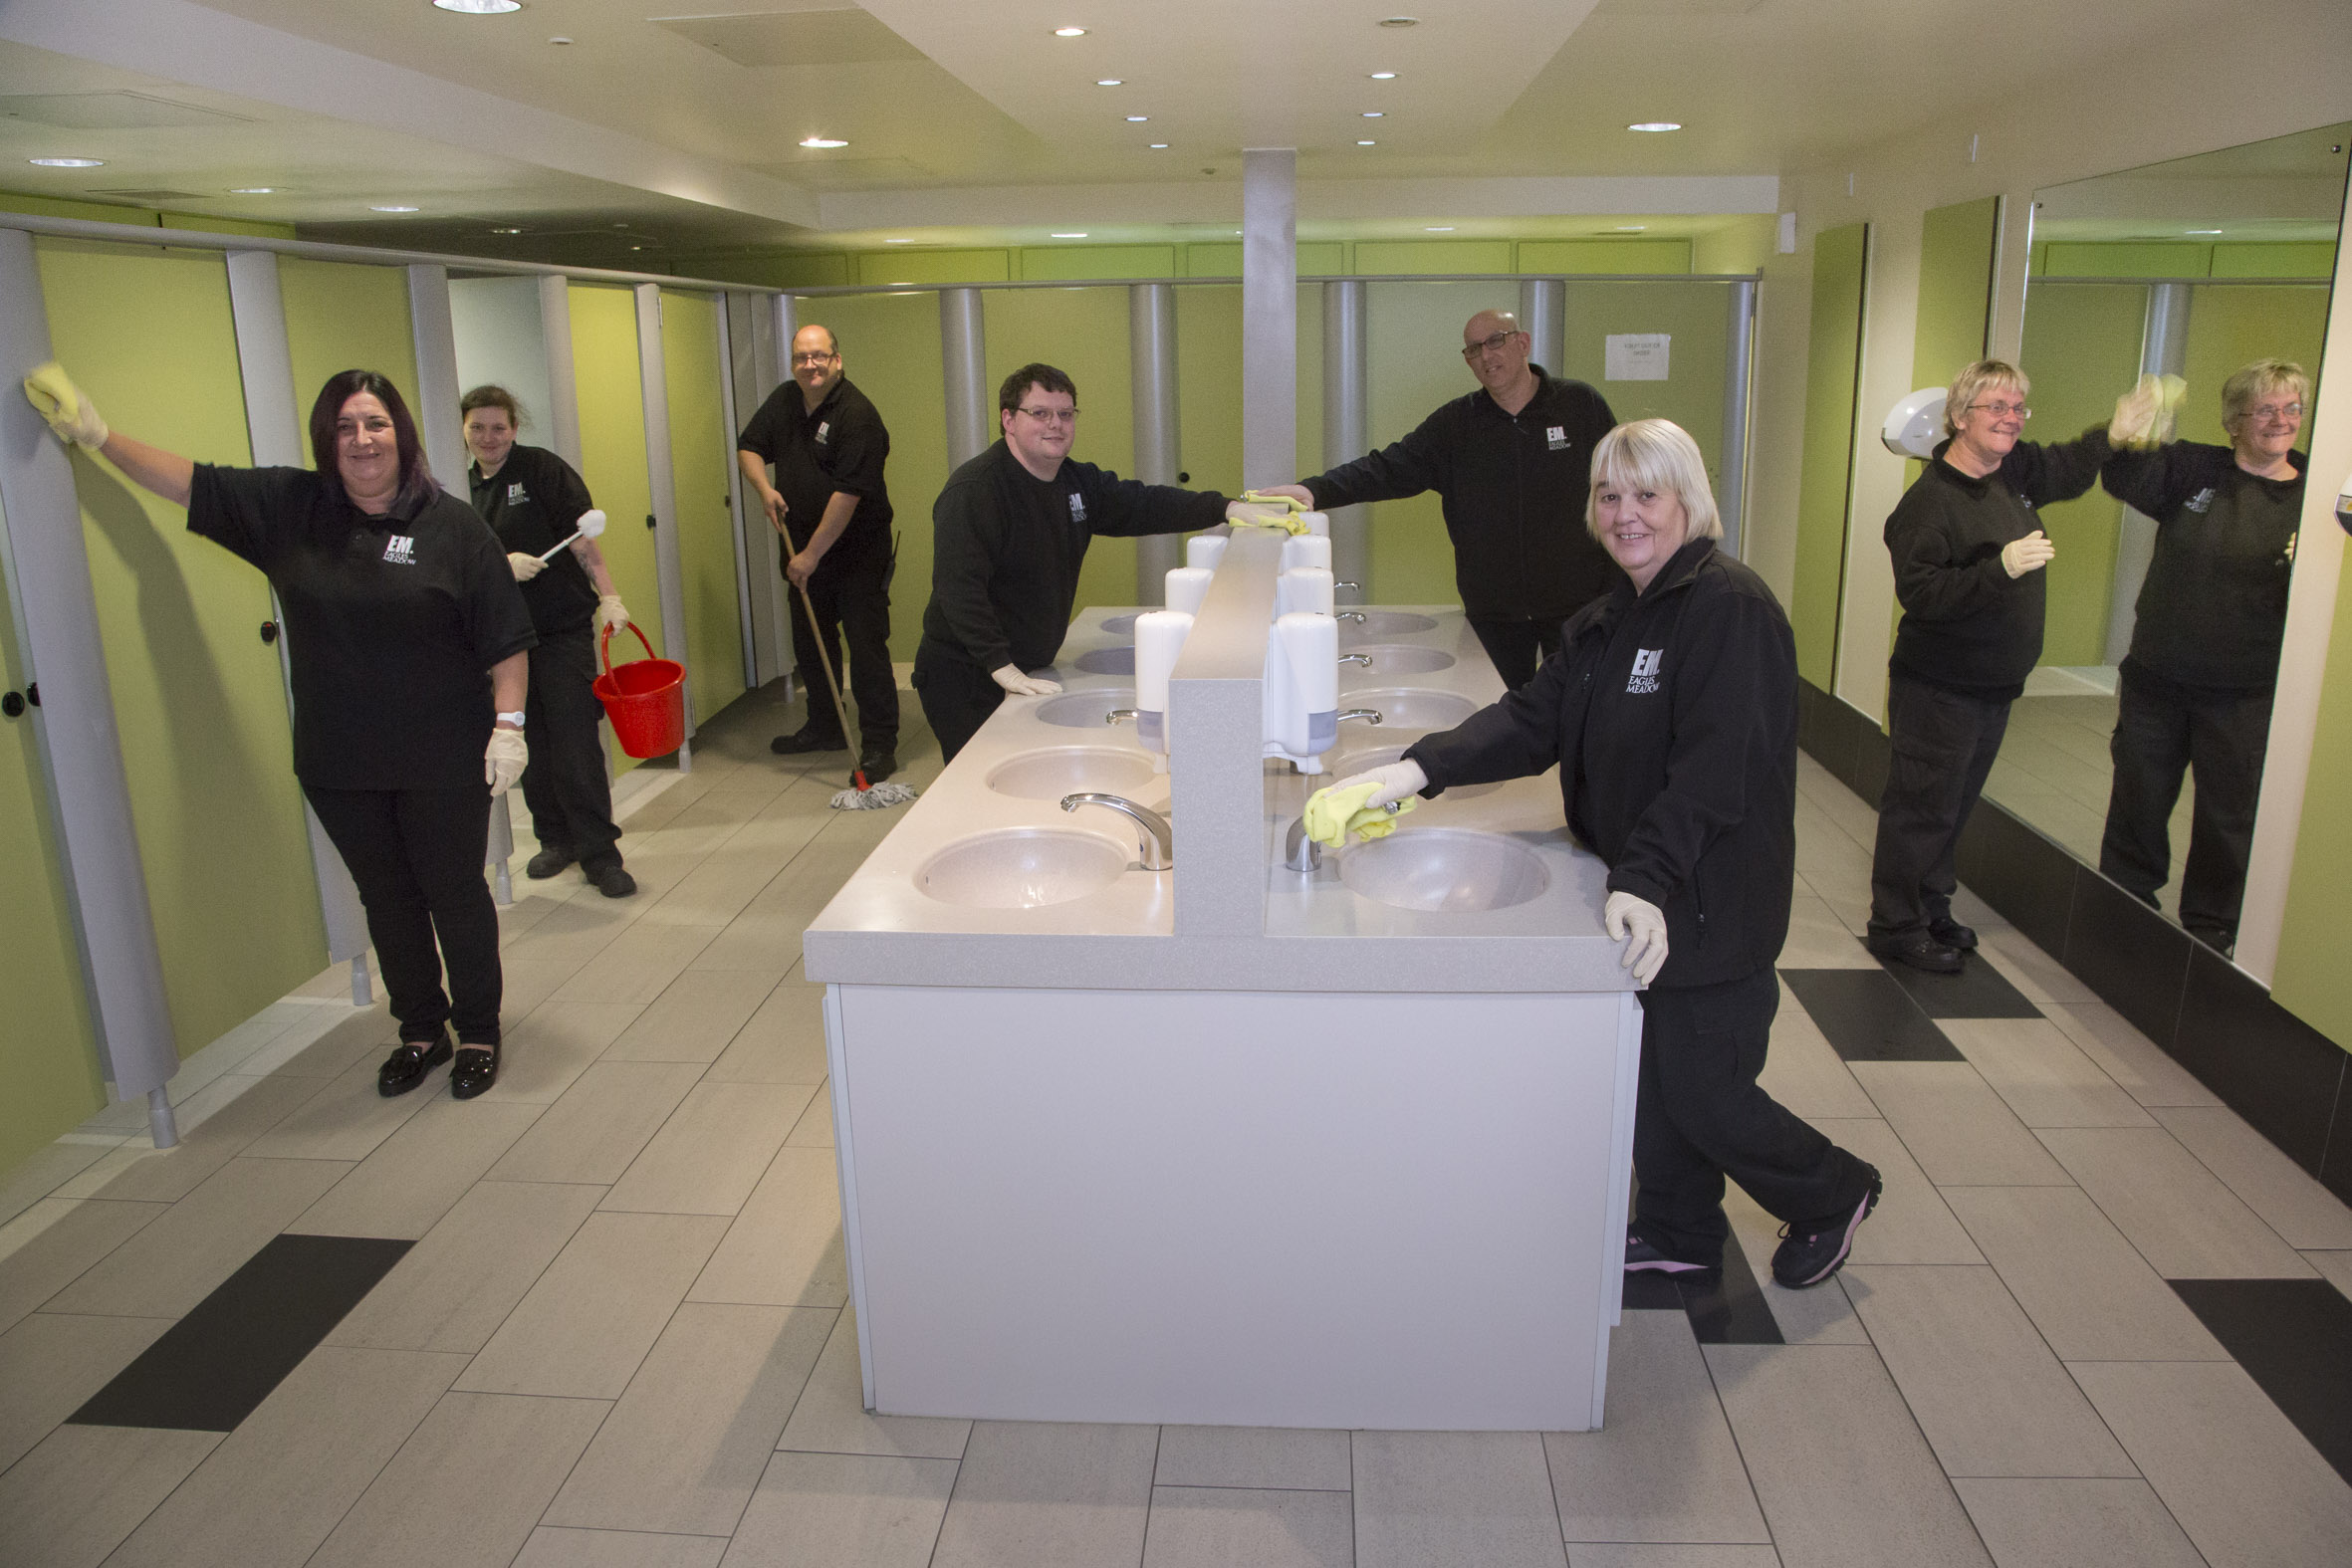 Loo team is flushed with pride after awards double